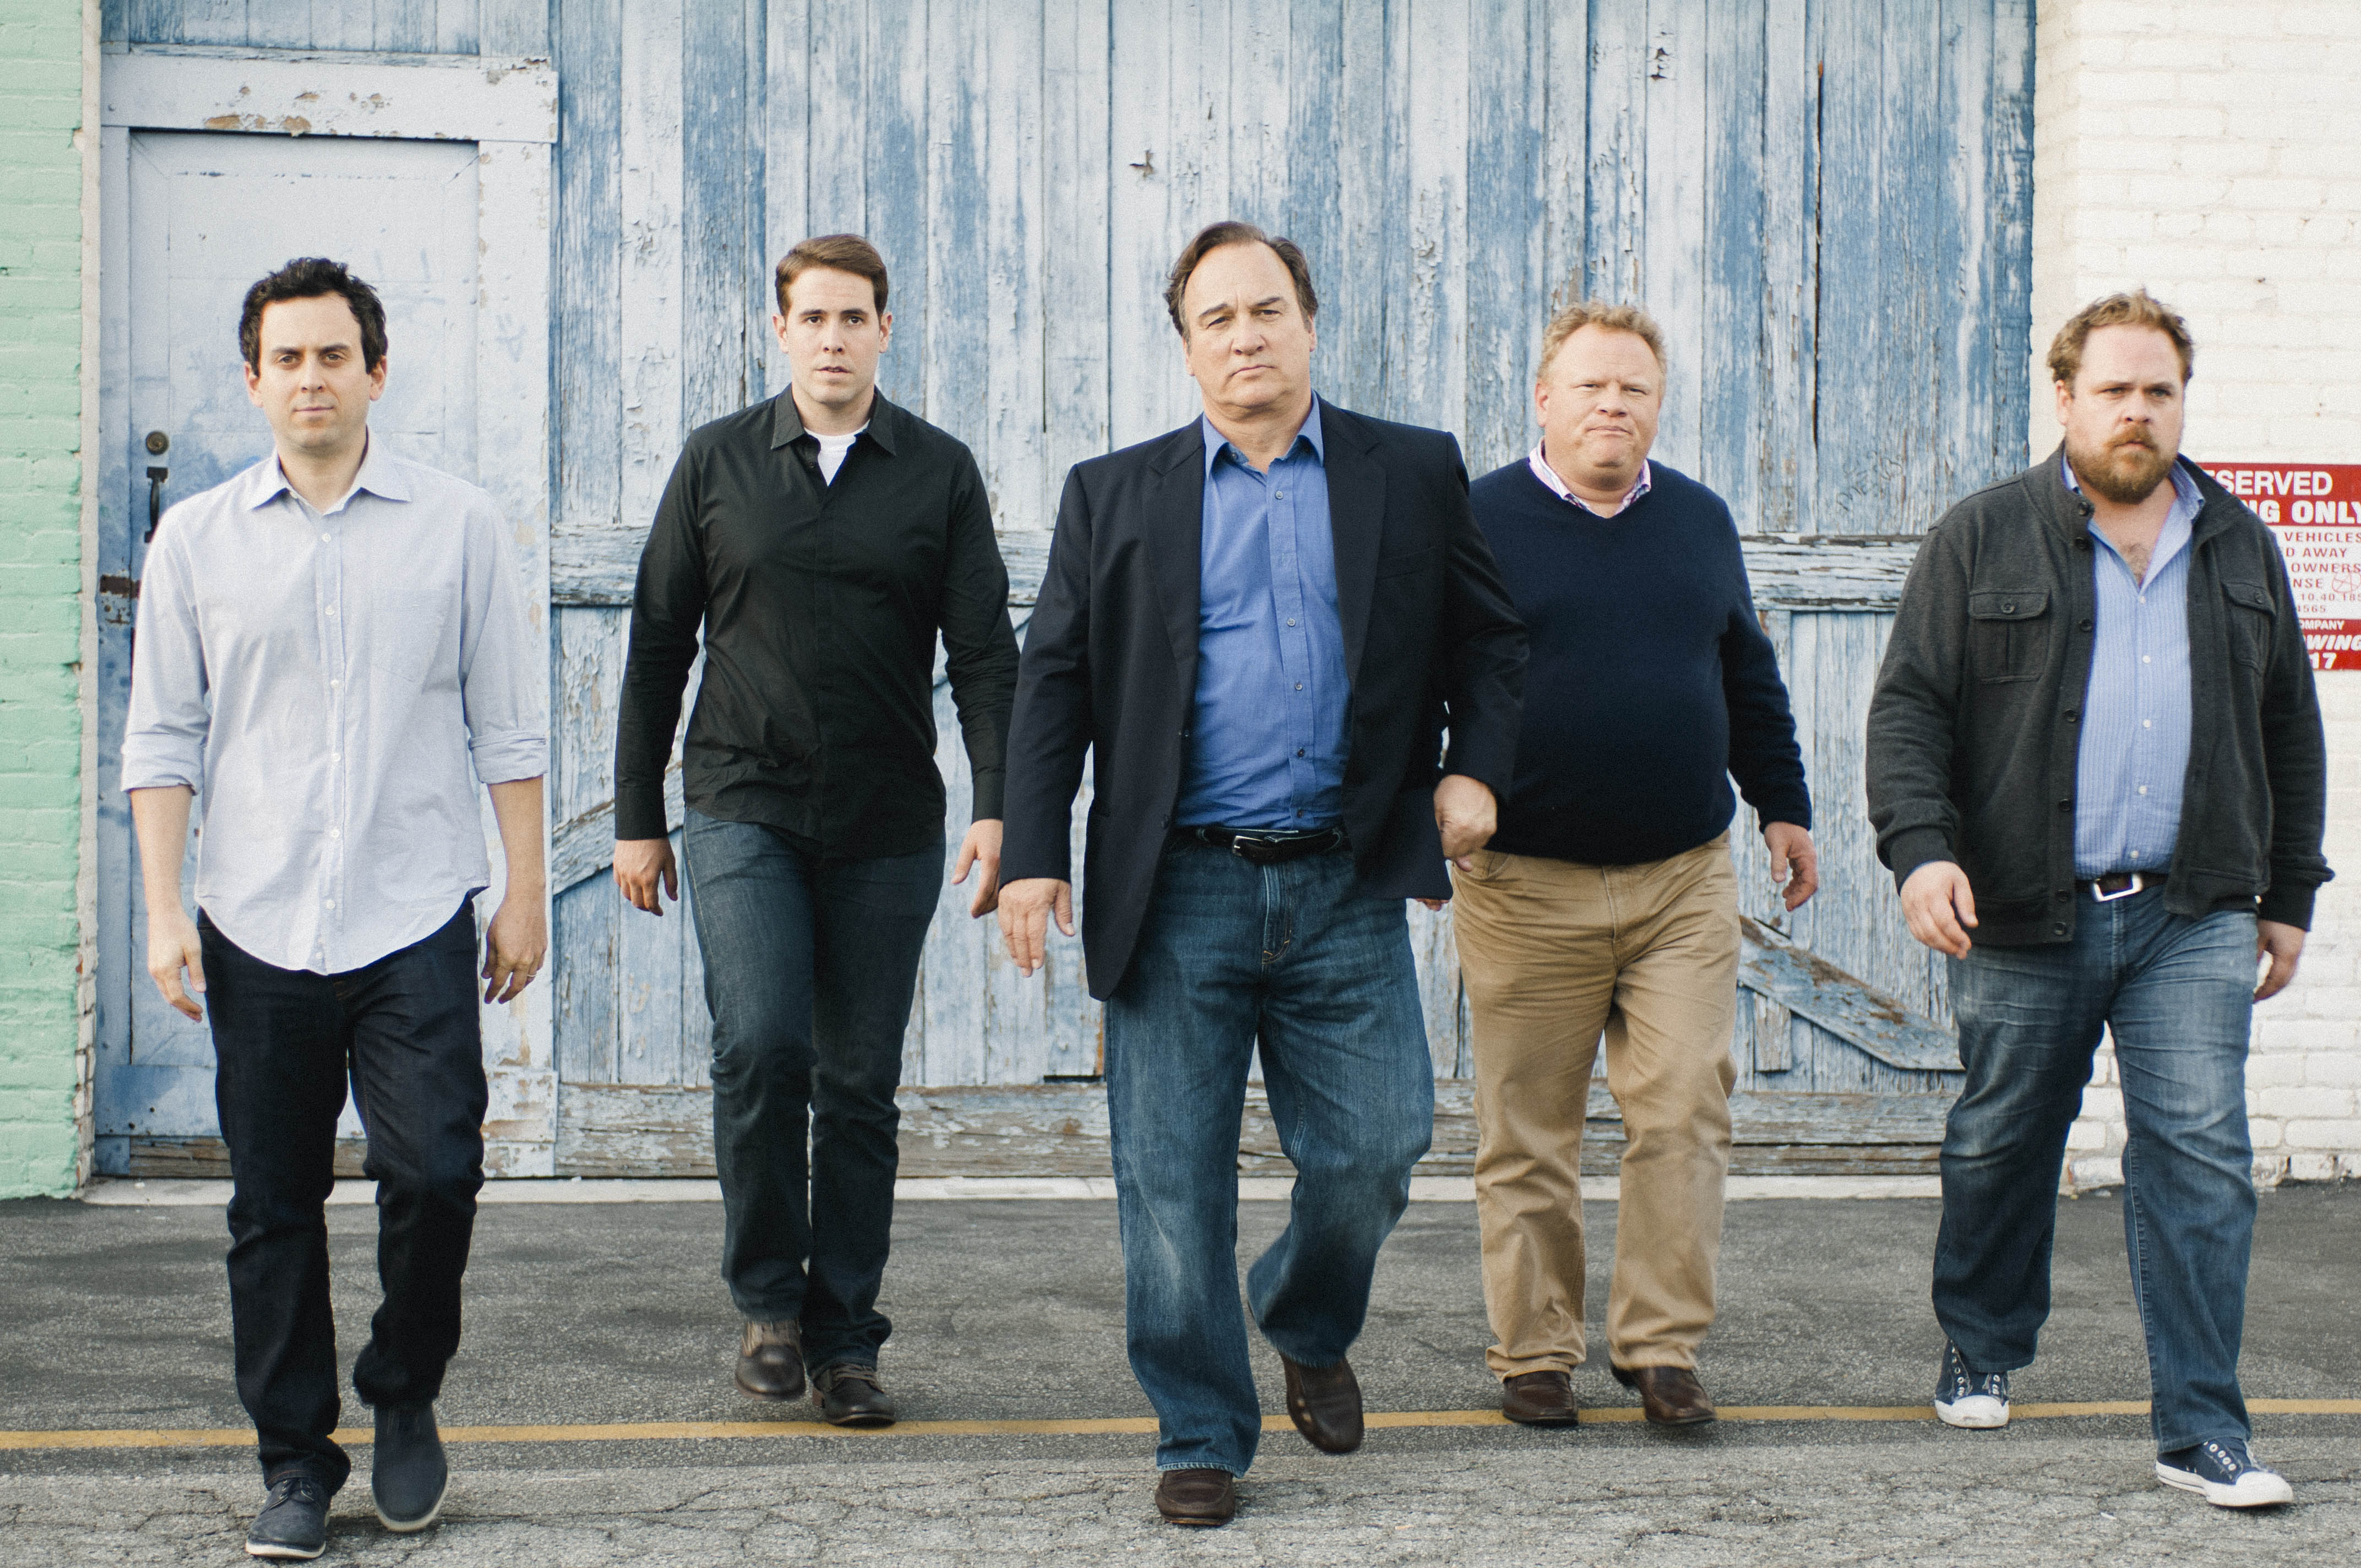 Jim Belushi and The Board of Comedy